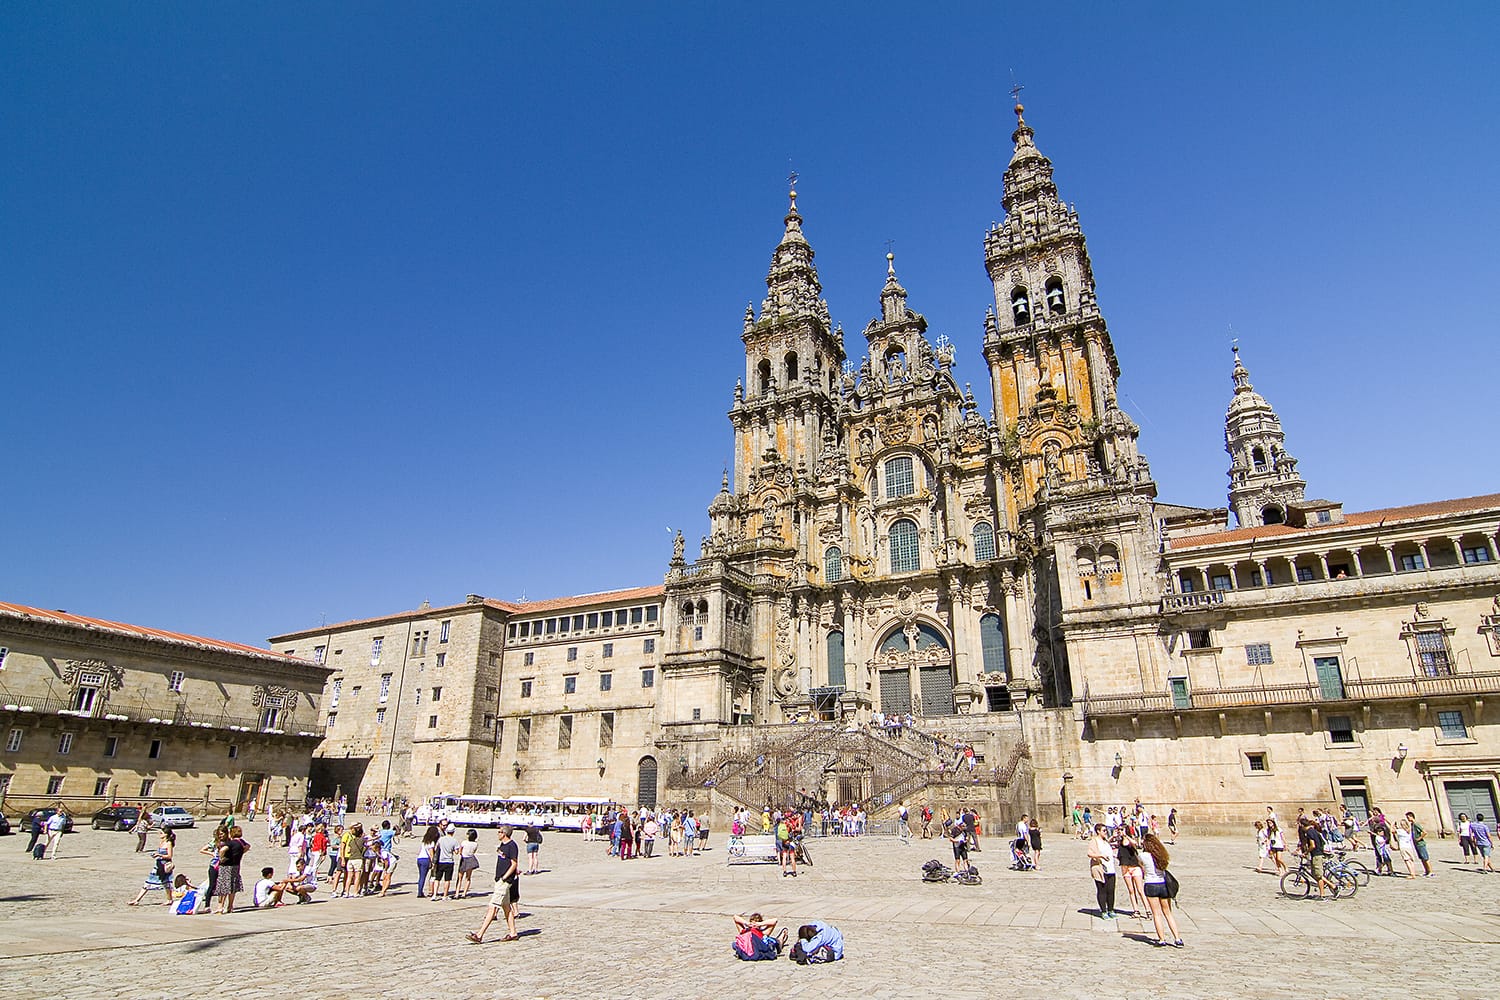 View of Obradoiro square and cathedral of Santiago, one of the most important Christian pilgrimage places, in Santiago de Compostela, Spain.